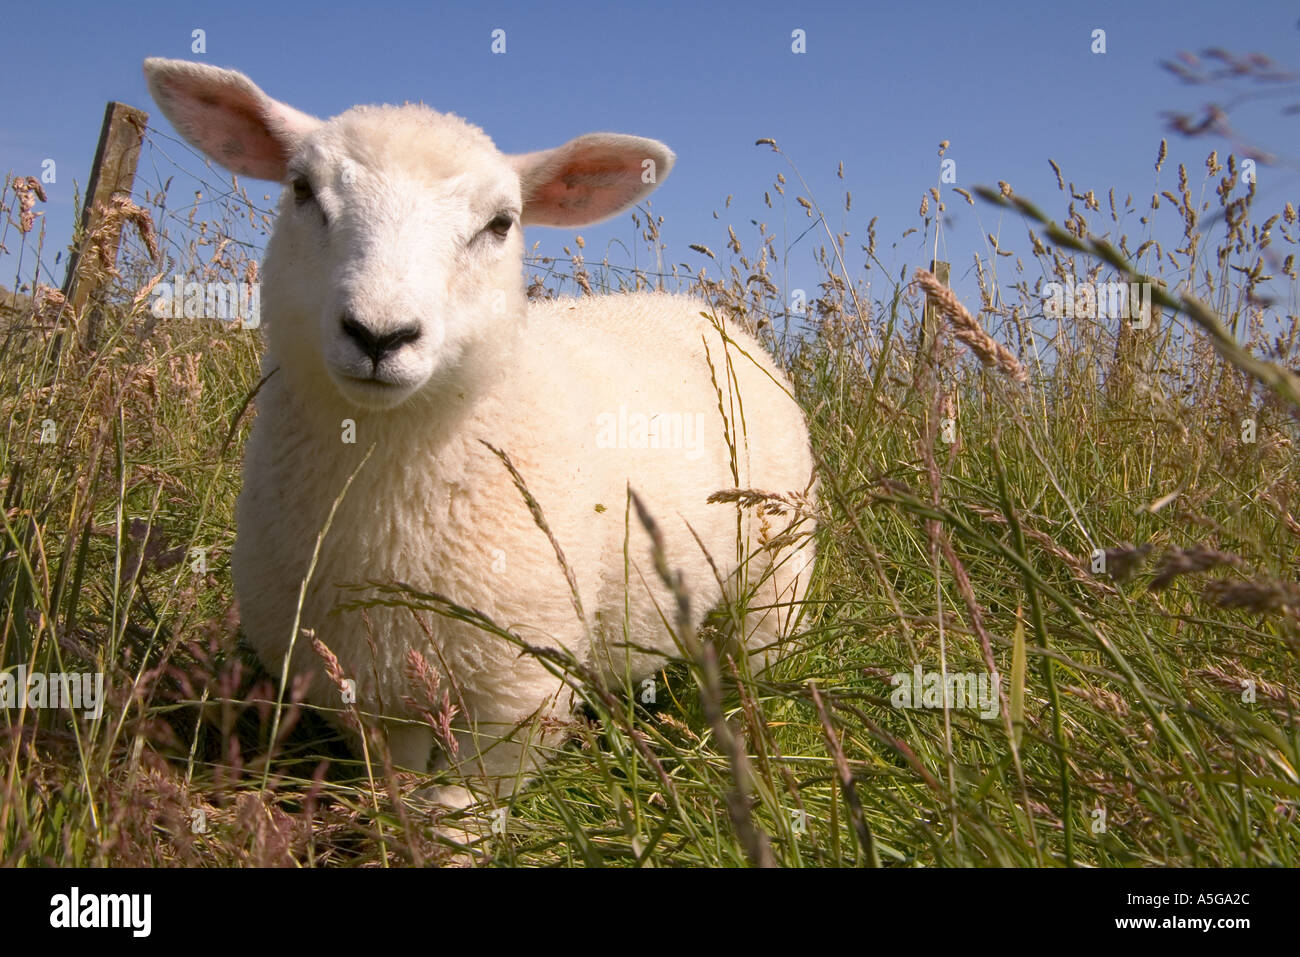 dh Sheep spring lamb FARM ANIMALS UK SCOTLAND In Grass field scottish animal single one cute low angle looking at camera face Stock Photo